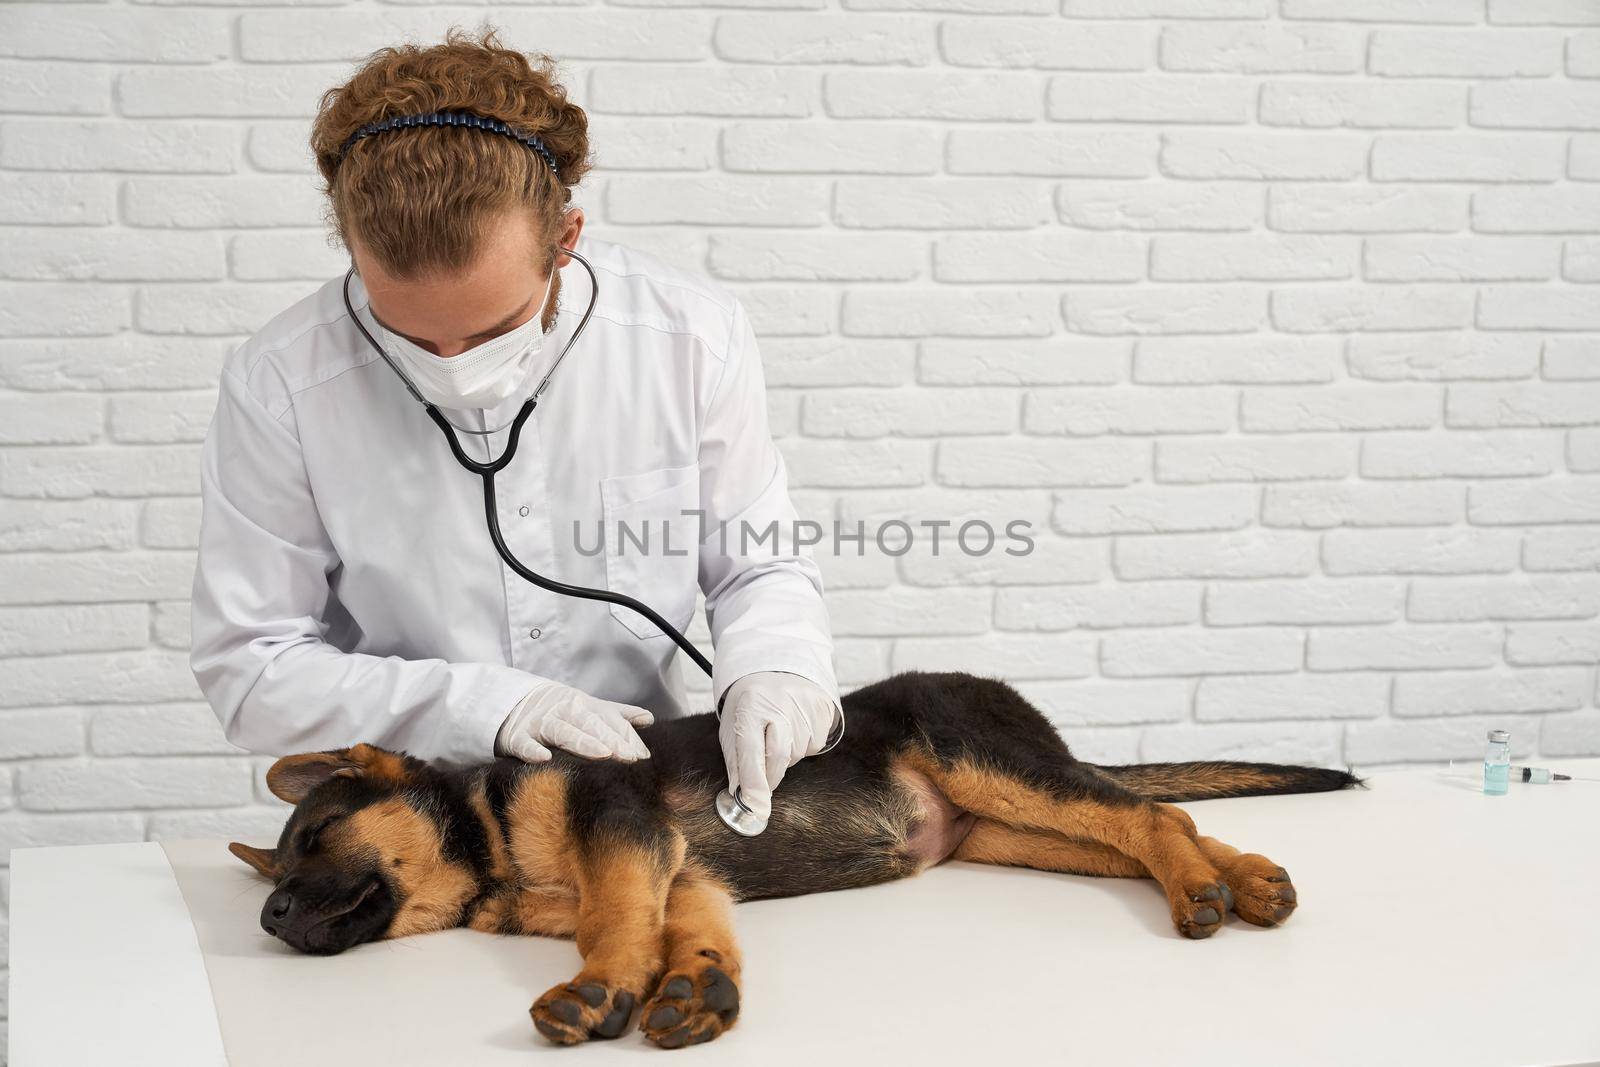 Front view of medical worker in coat and gloves using stethoscope for checking heartbeat of little doggy. German shepherd sleeping sweet during checkup at vet clinic. Concept of pets health care.